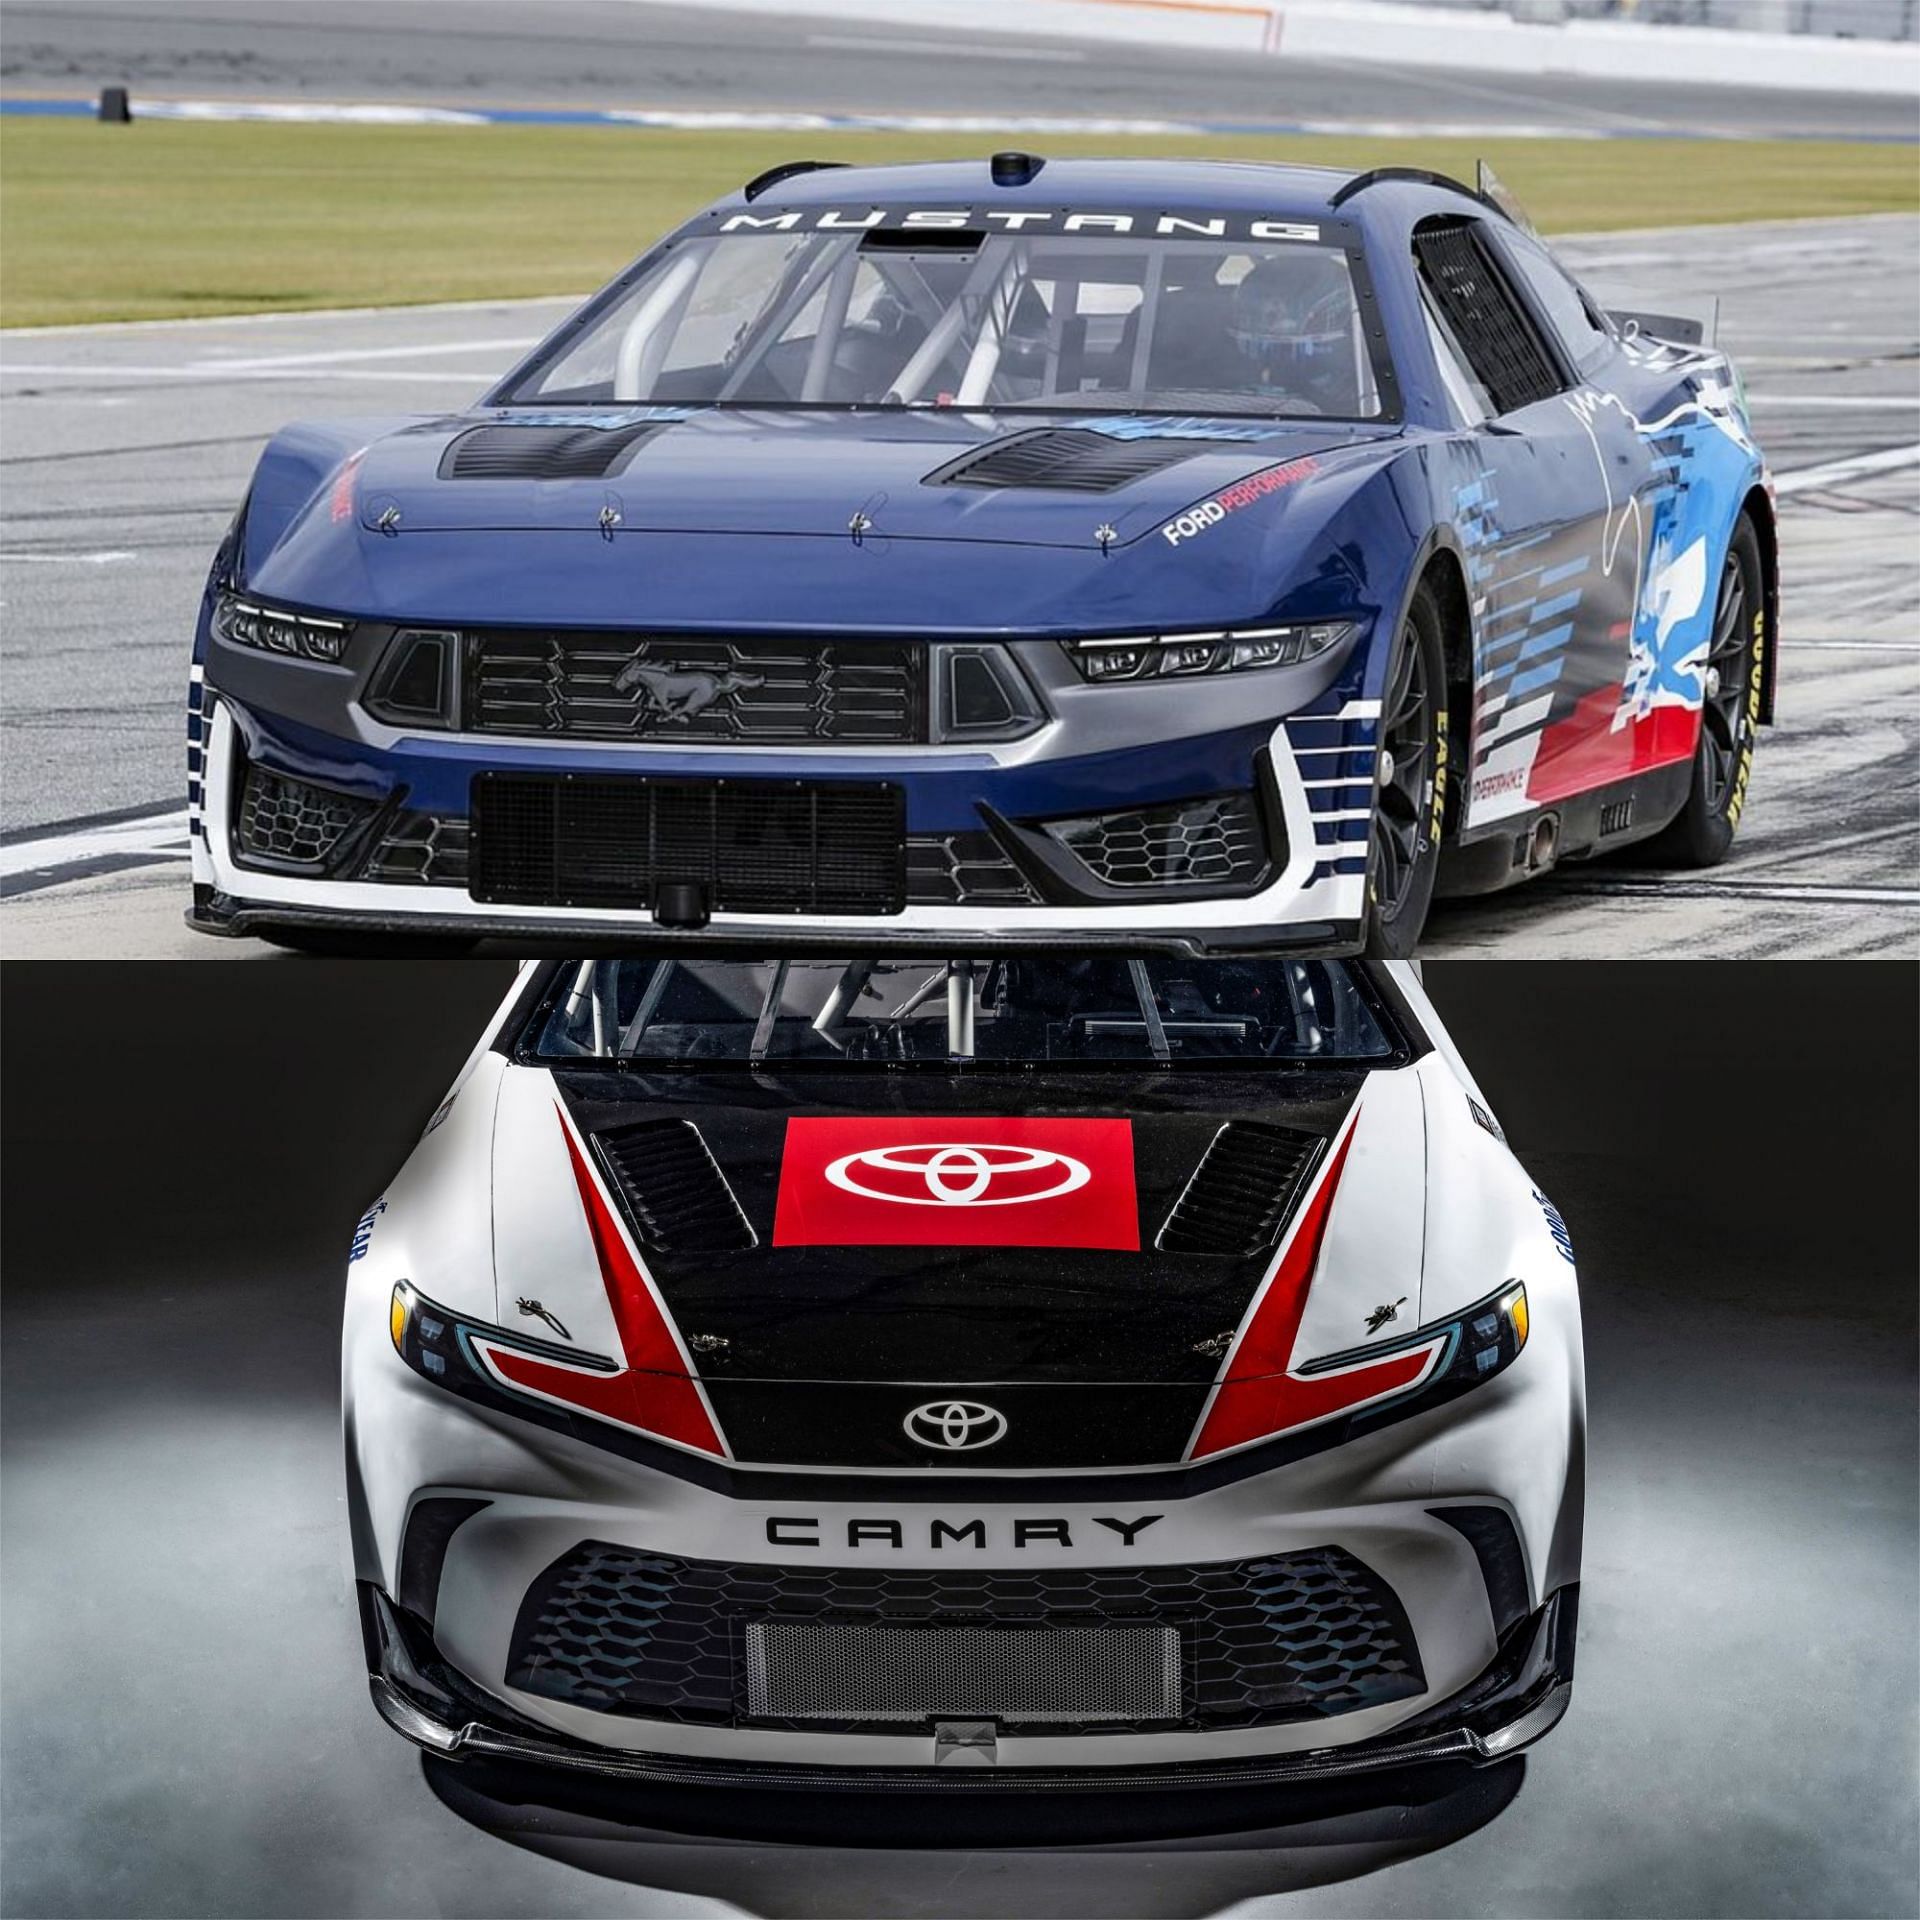 (Top-Bottom) New iterations of Ford (Mustang Dark Horse) and Toyota